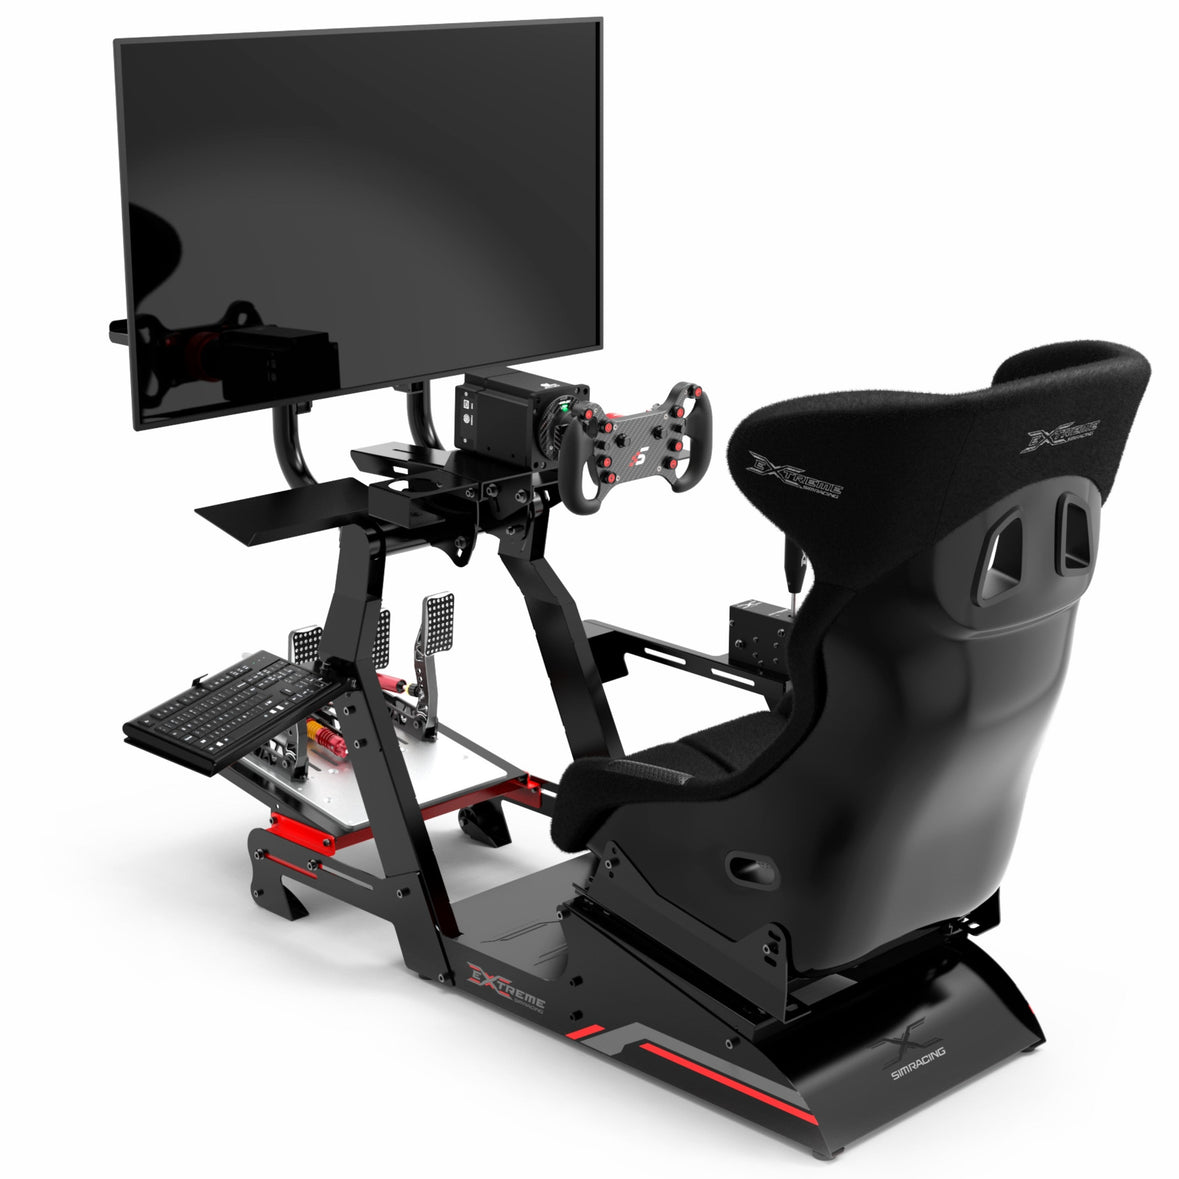 Extreme SimRacing Extreme Workstation Articulated Keyboard For